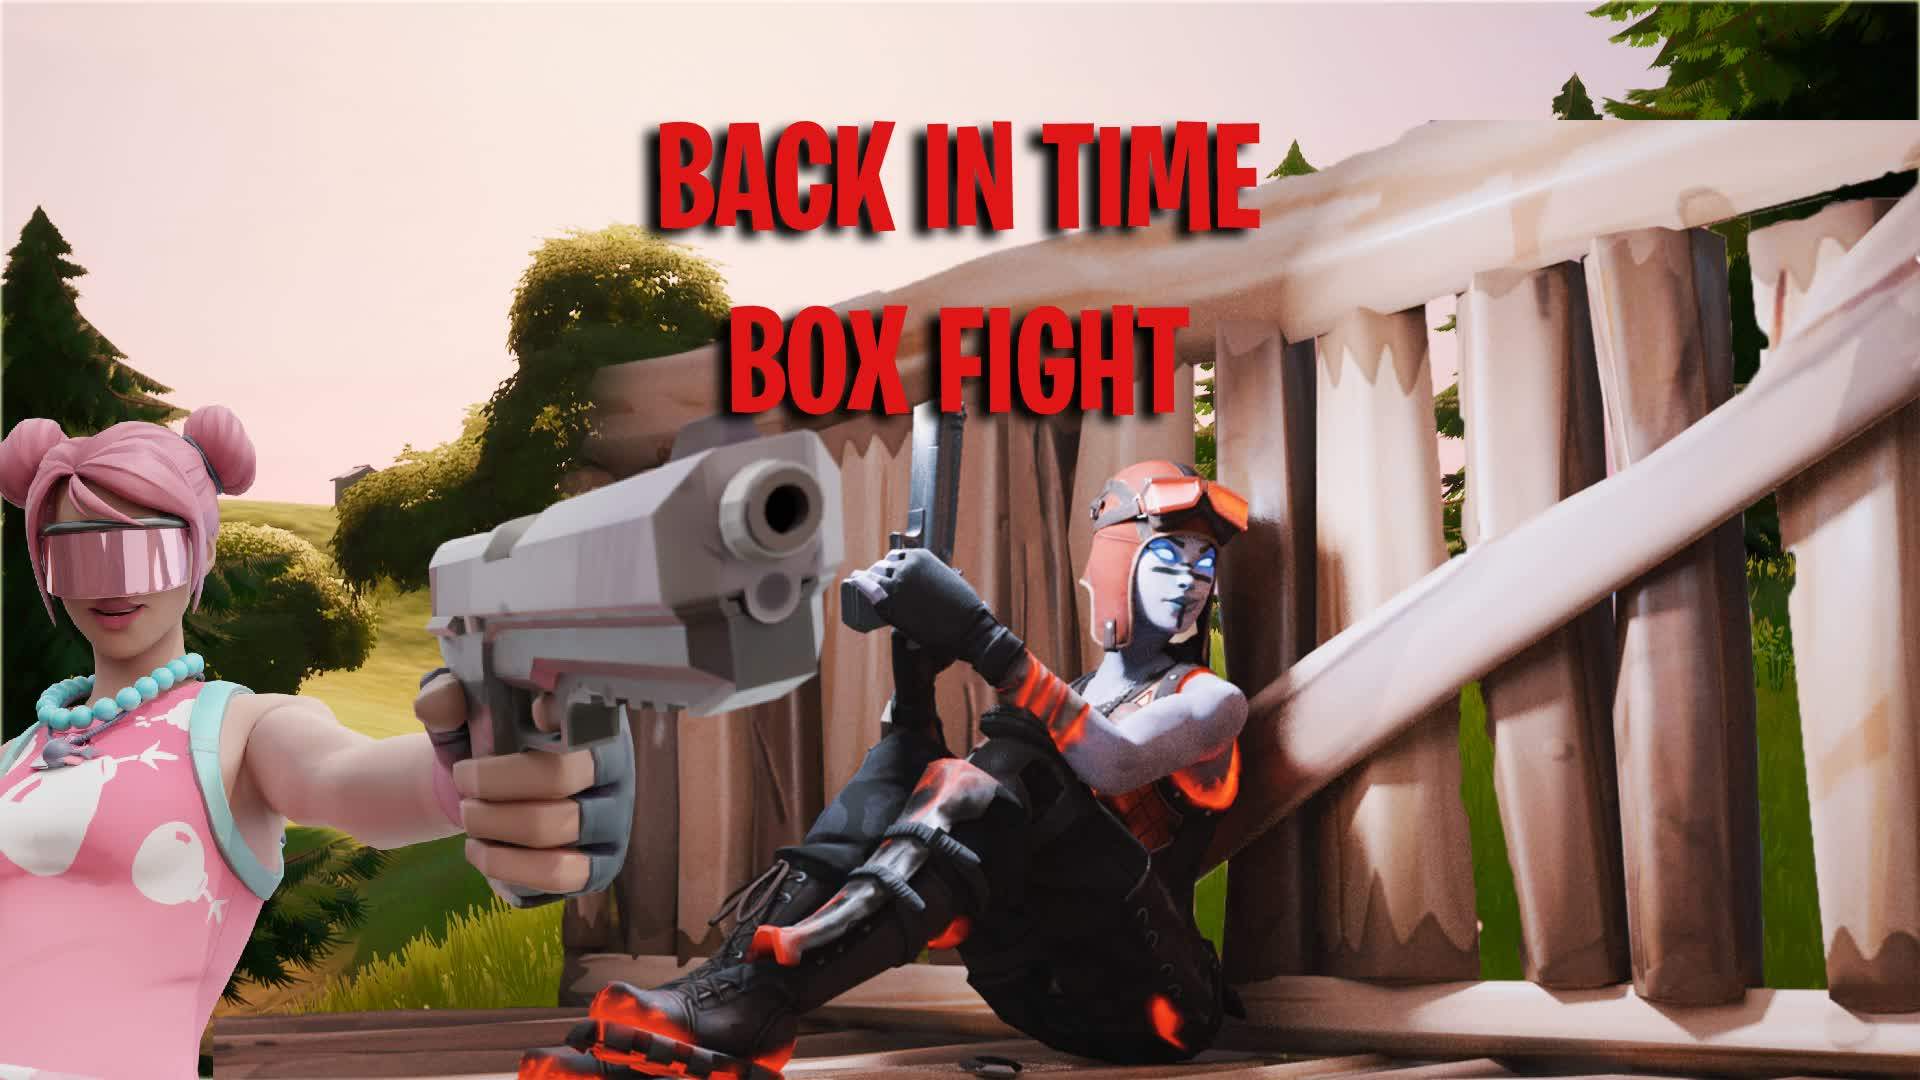 BACK IN TIME BOX FIGHT